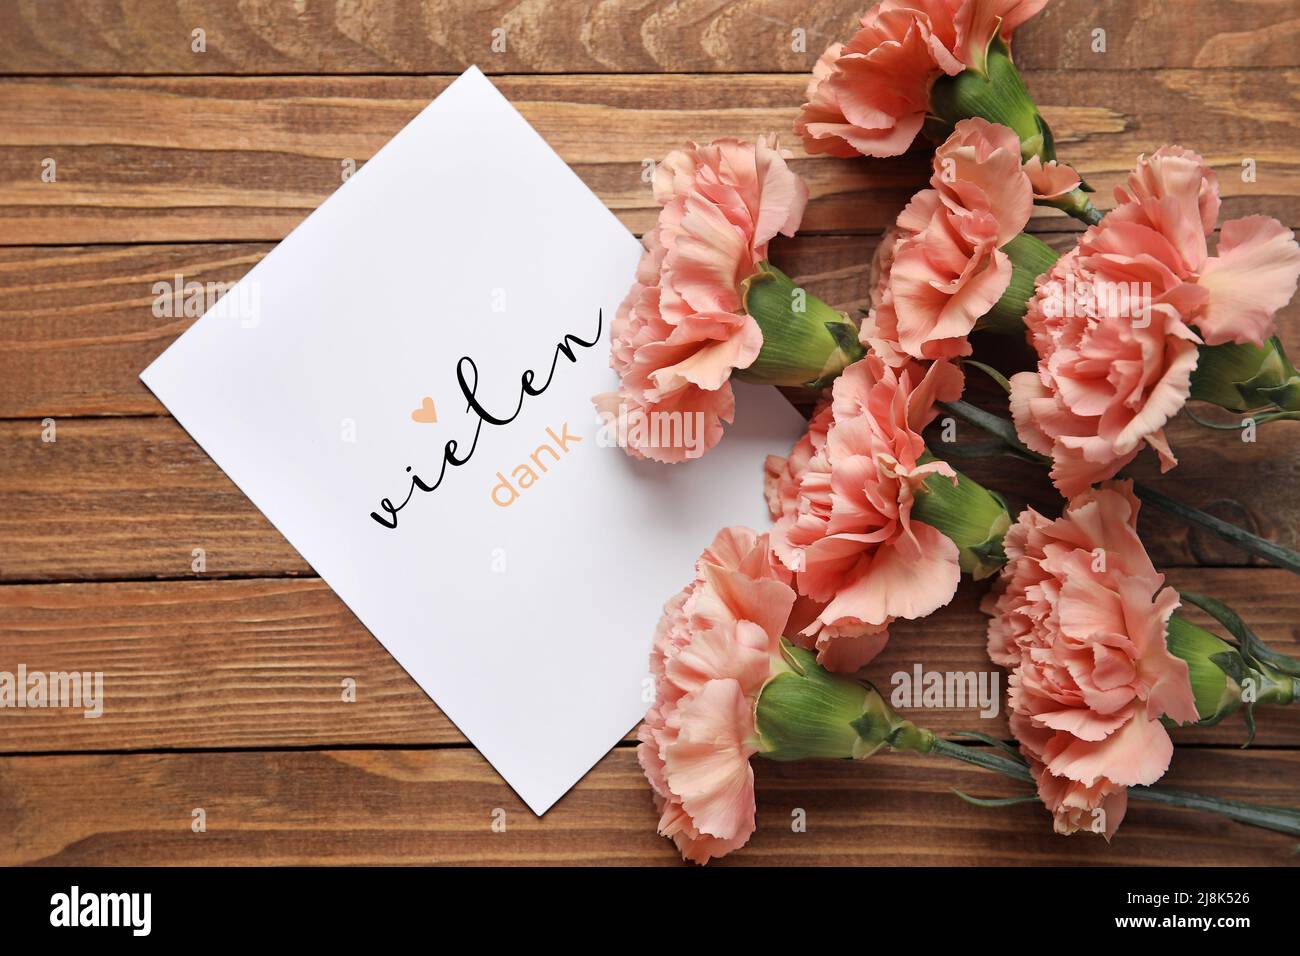 Bouquet of carnations and card with text VIELEN DANK (German for Thanks a lot) on wooden background Stock Photo